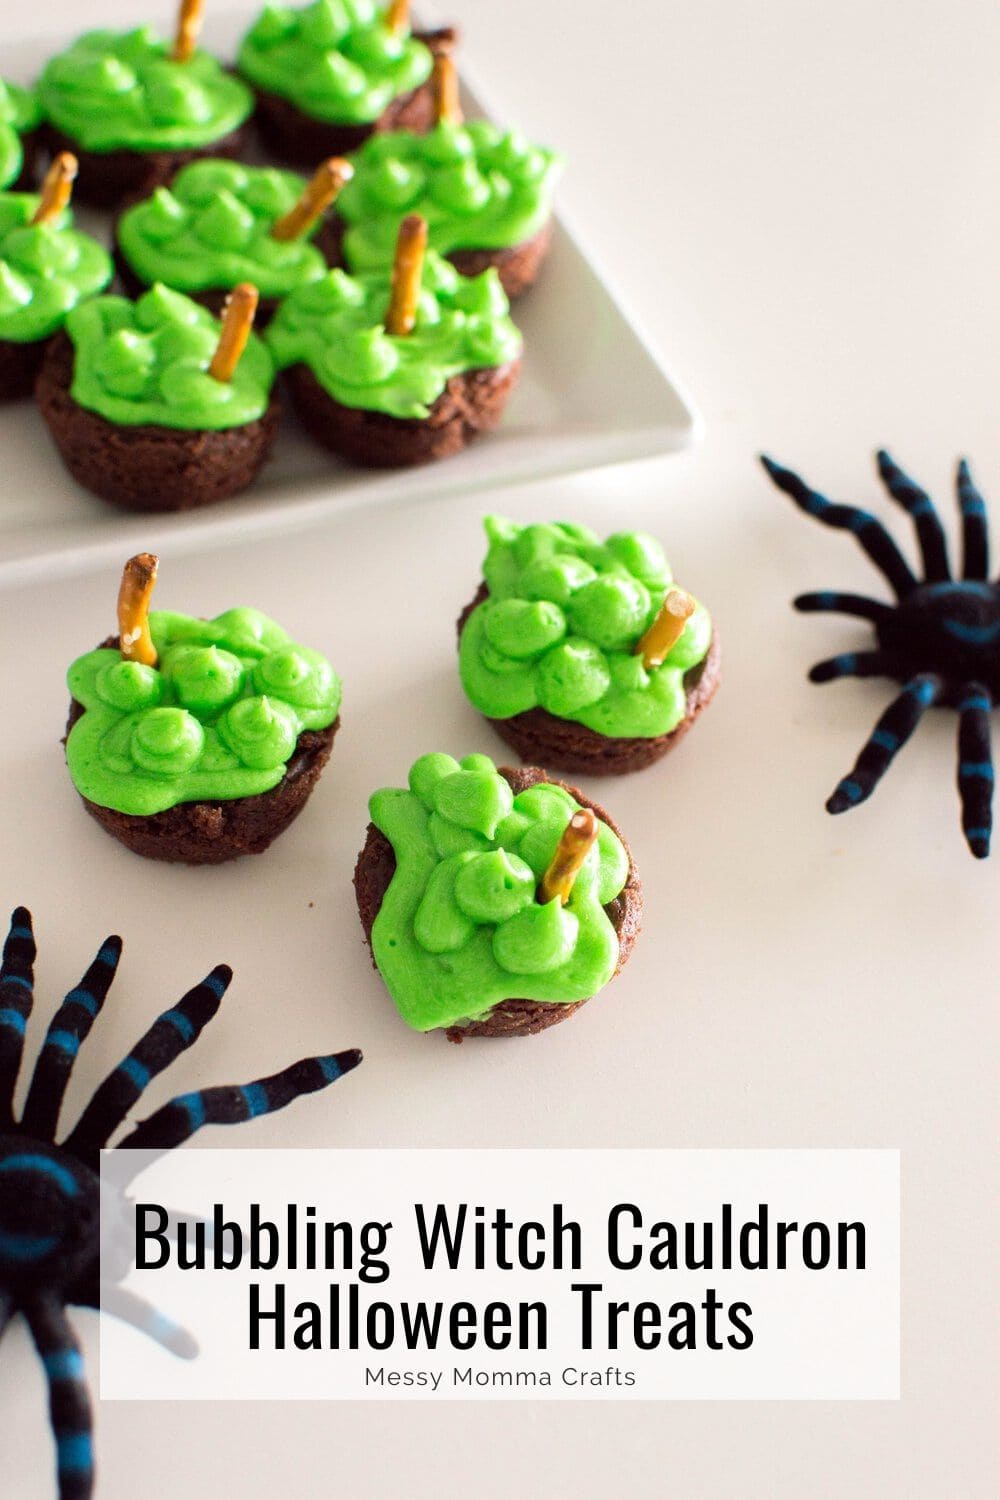 Bubbling witch cauldron Halloween treats with green frosting and a pretzel stir stick.